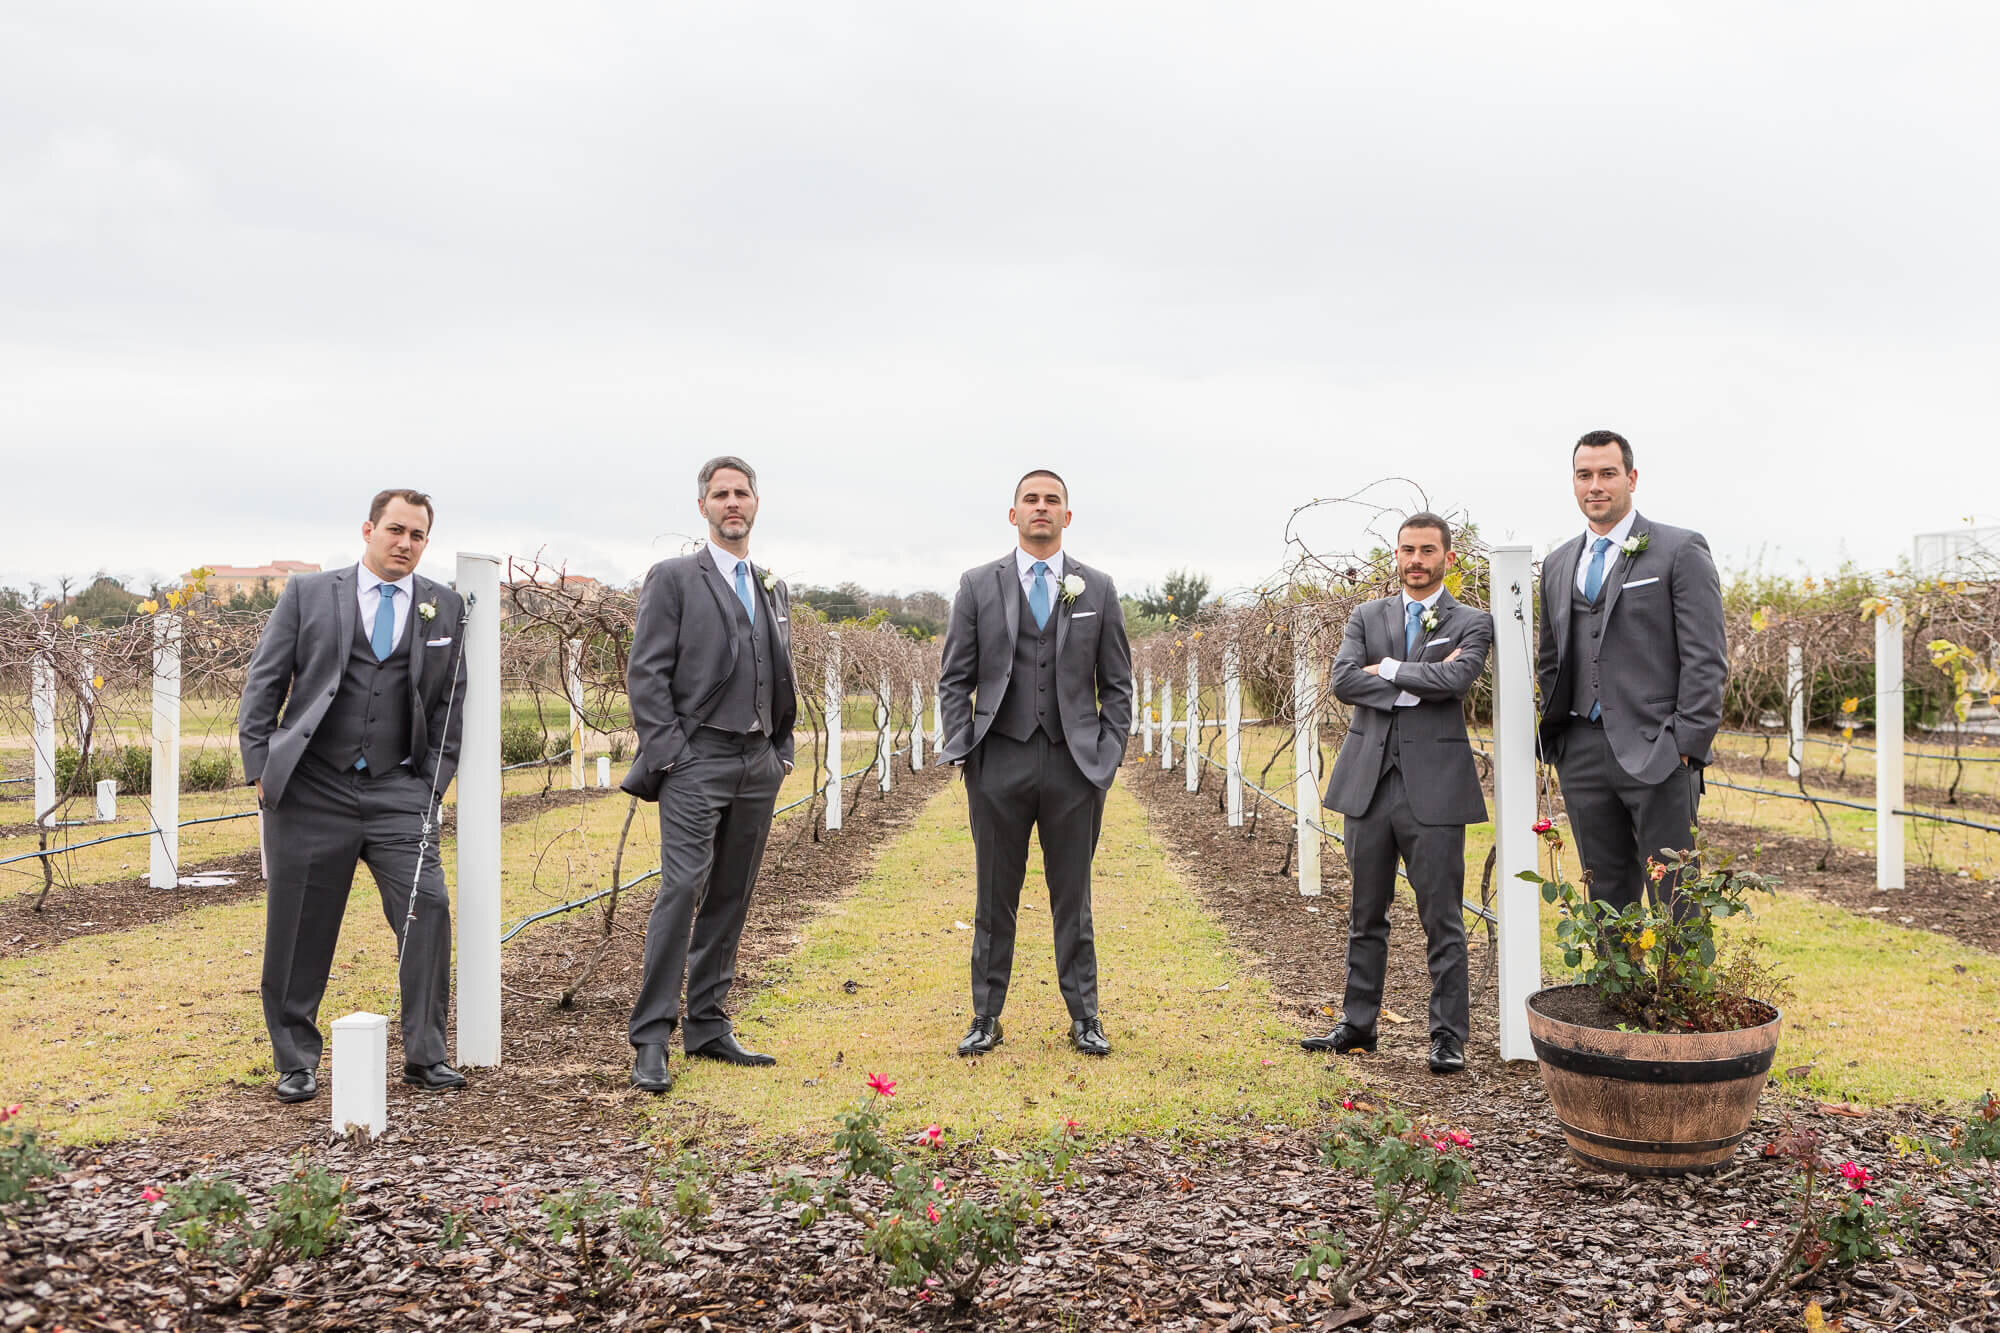  outdoor wedding at Kissimmee's Island Grove Wine Company at Formosa Gardens 